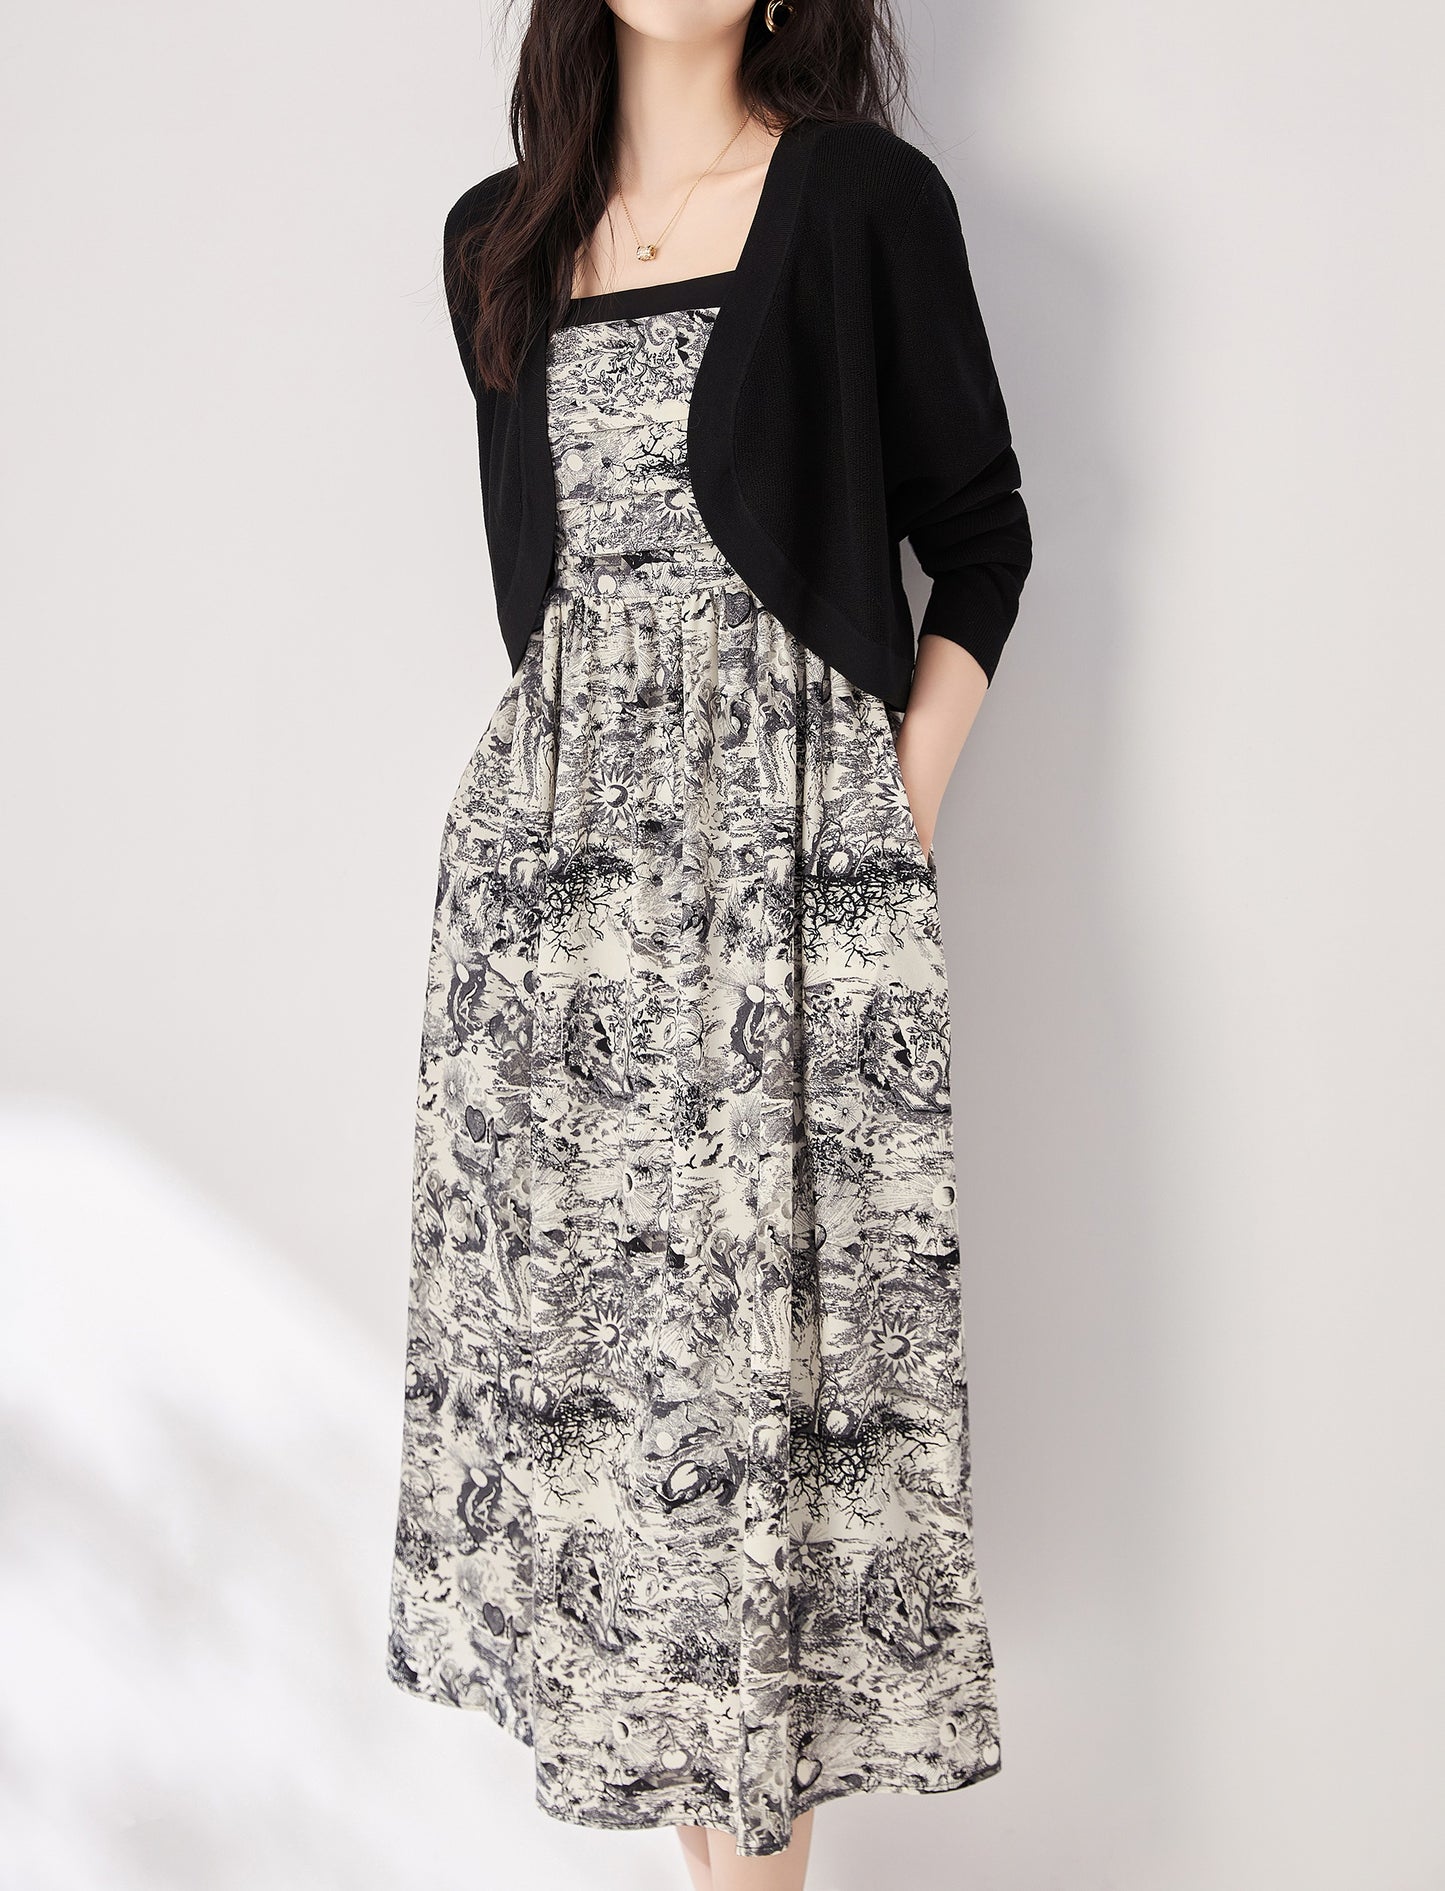 Nadeline 2 piece set chiffon spaghetti strap printed dress with knitted cropped cardigan